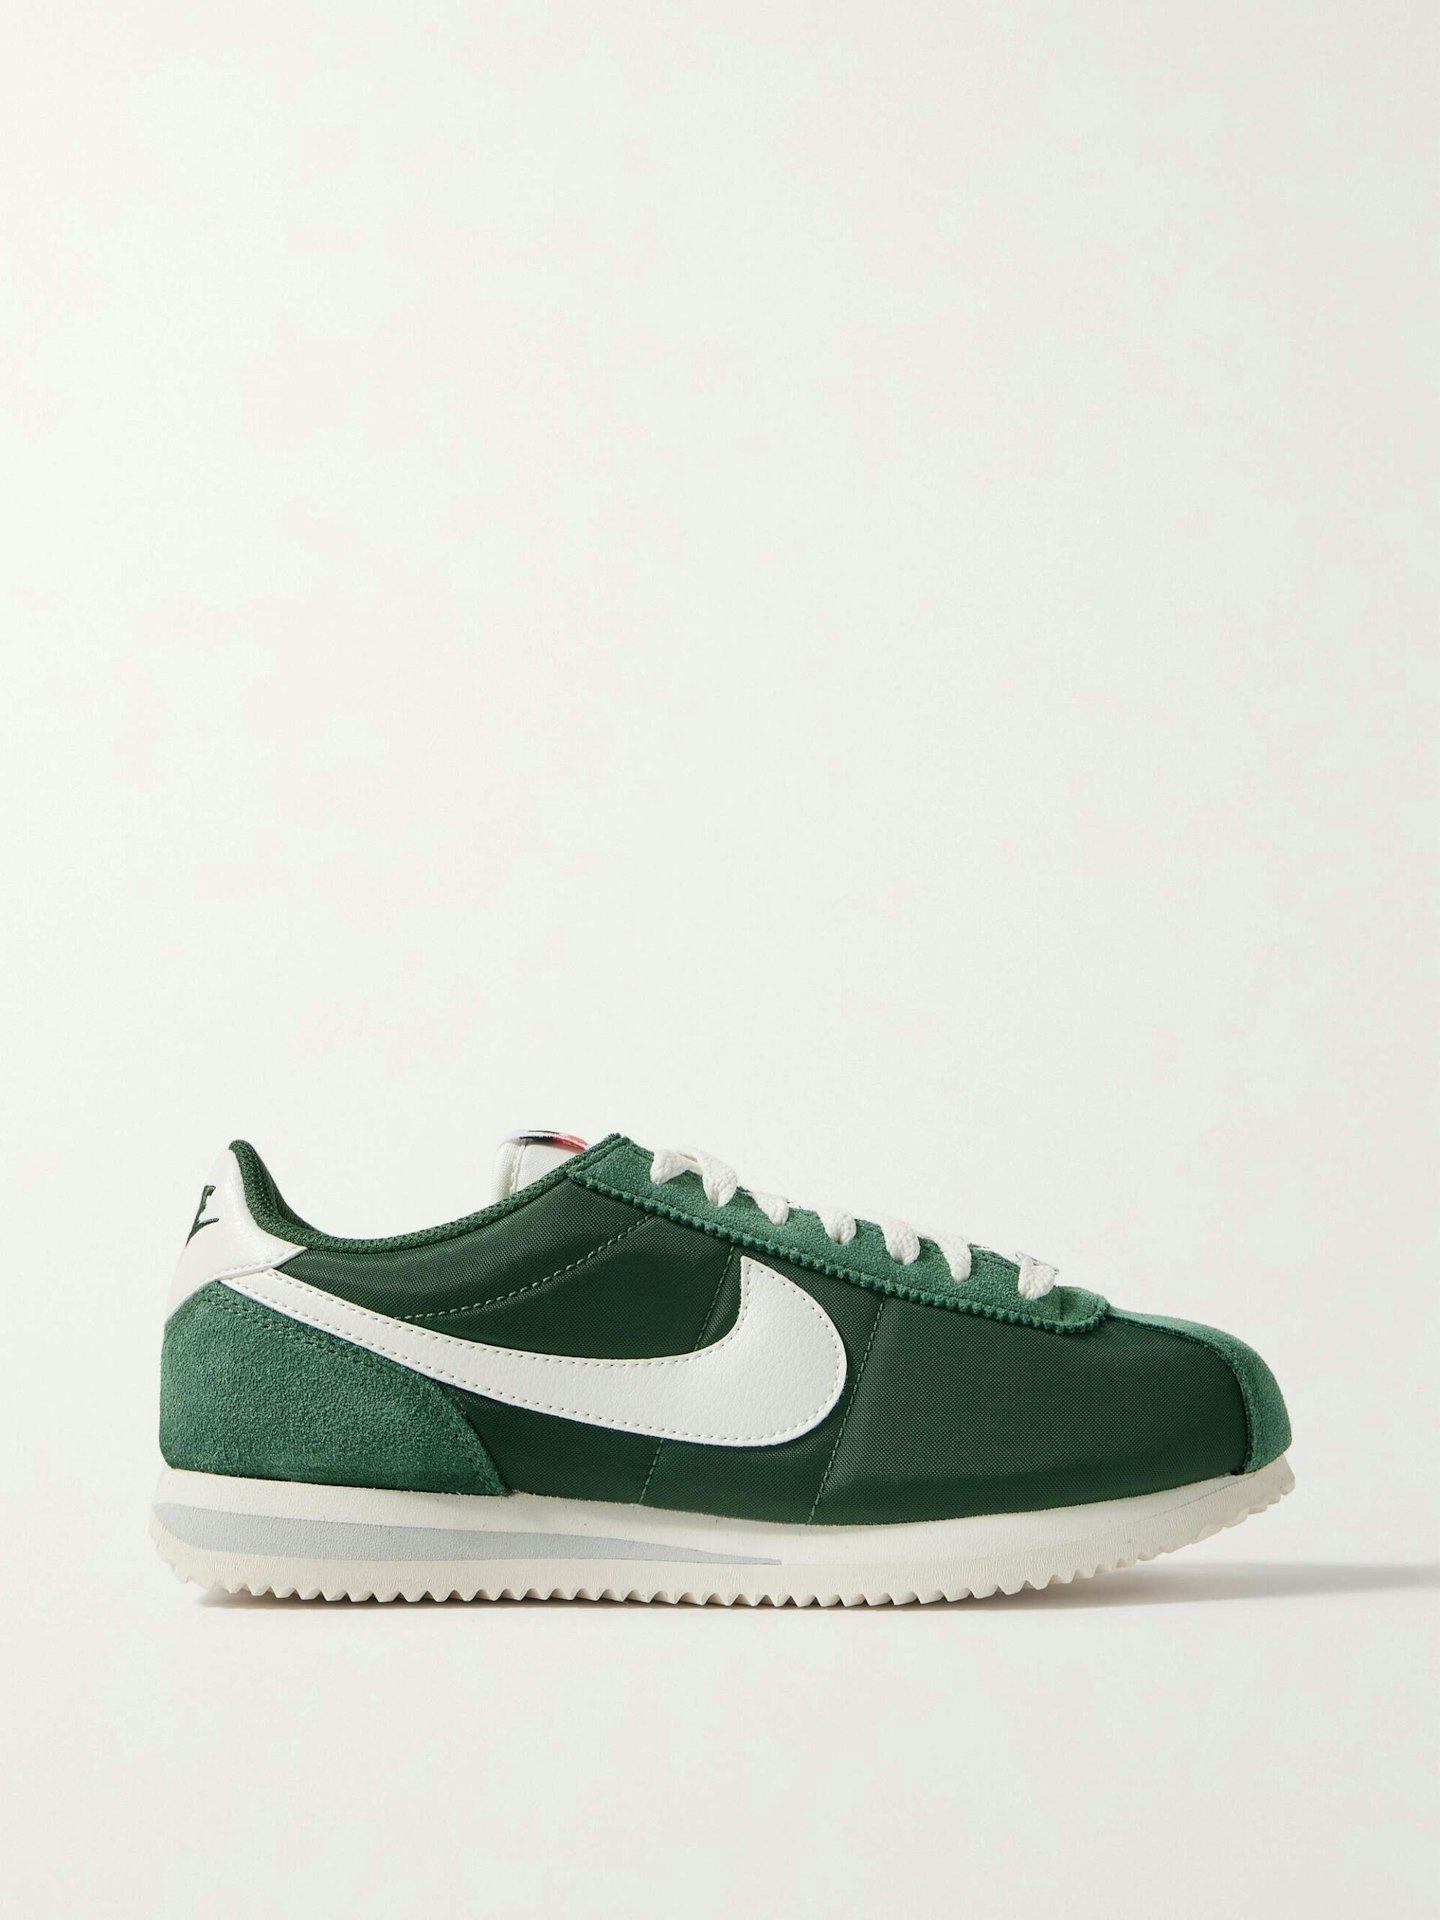 Nike, Cortez Suede And Leather-Trimmed Shell Sneakers